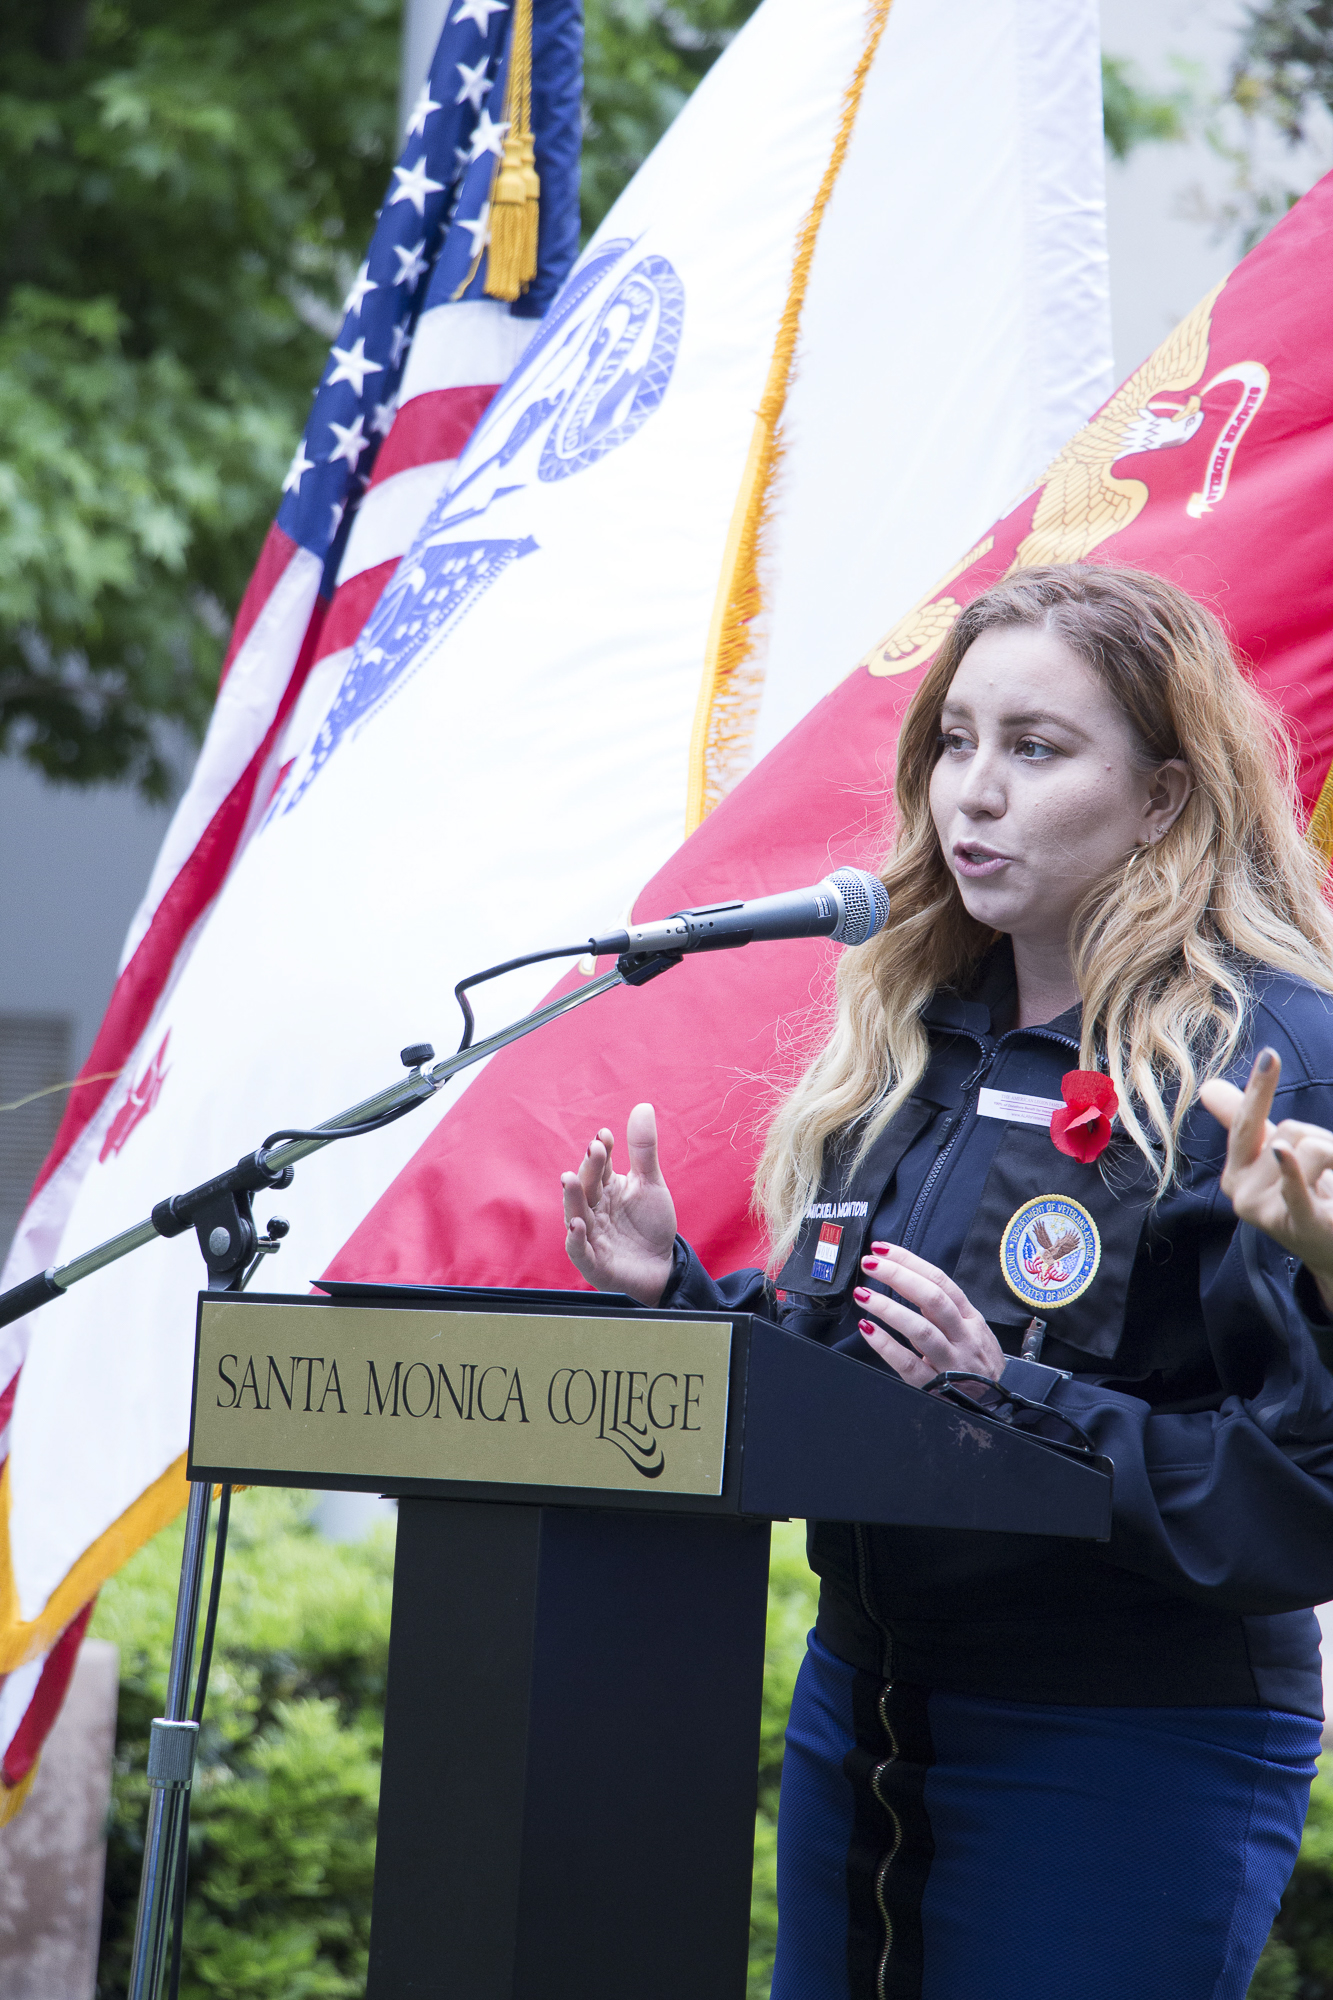  Mickiela Montoya, a veteran spoke about her time in the National Guard in Iraq during the Memorial Day Commemoration in Santa Monica College on Thursday May 24, 2018 in Santa Monica, California. (Wilson Gomez/Corsair Photo) 